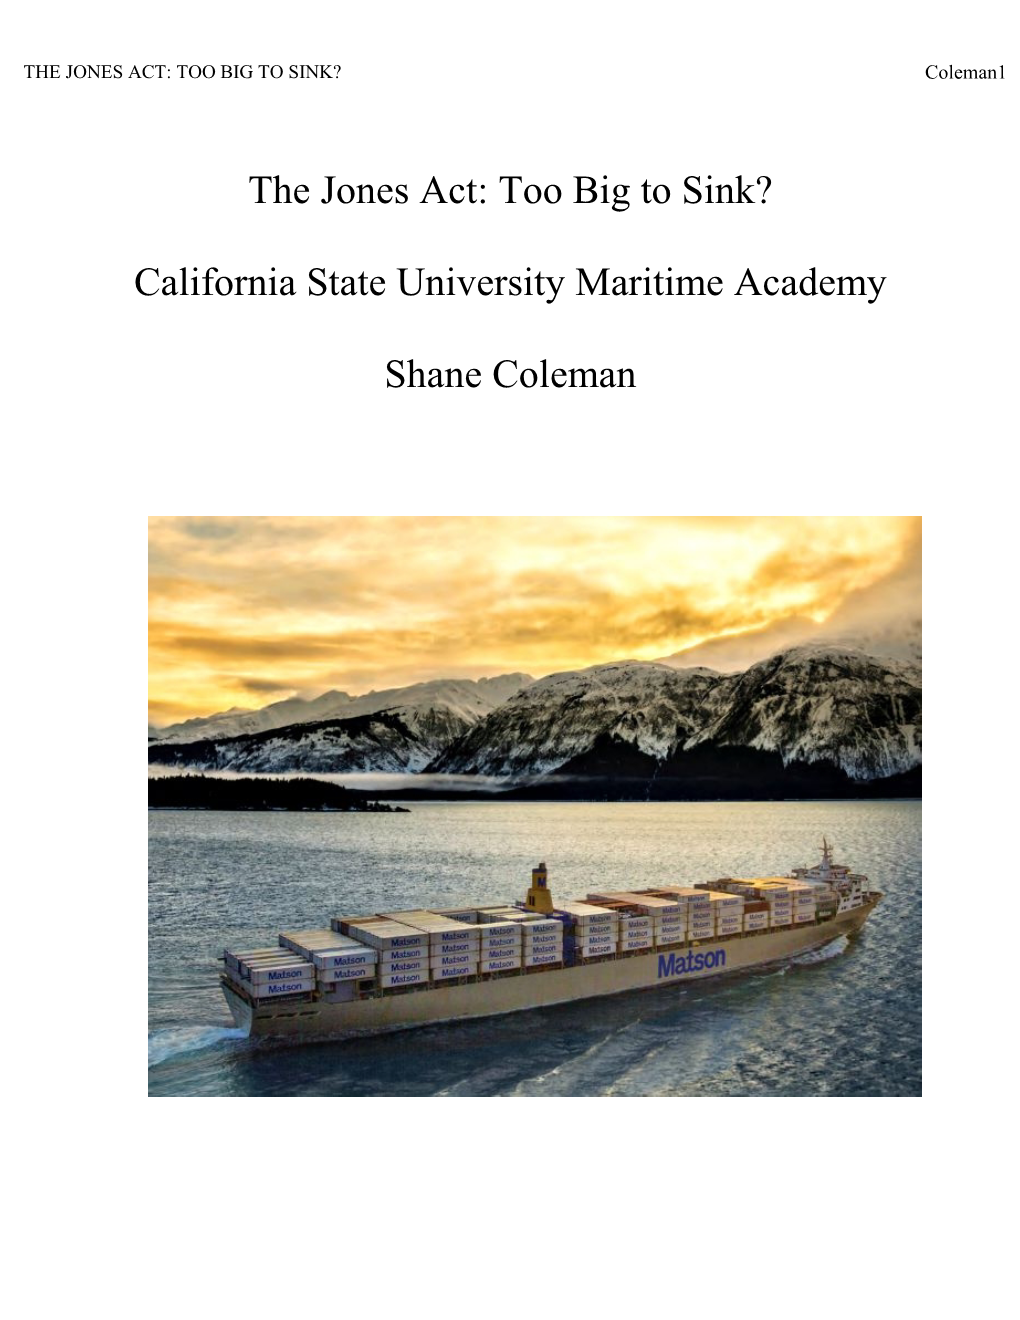 The Jones Act: Too Big to Sink? California State